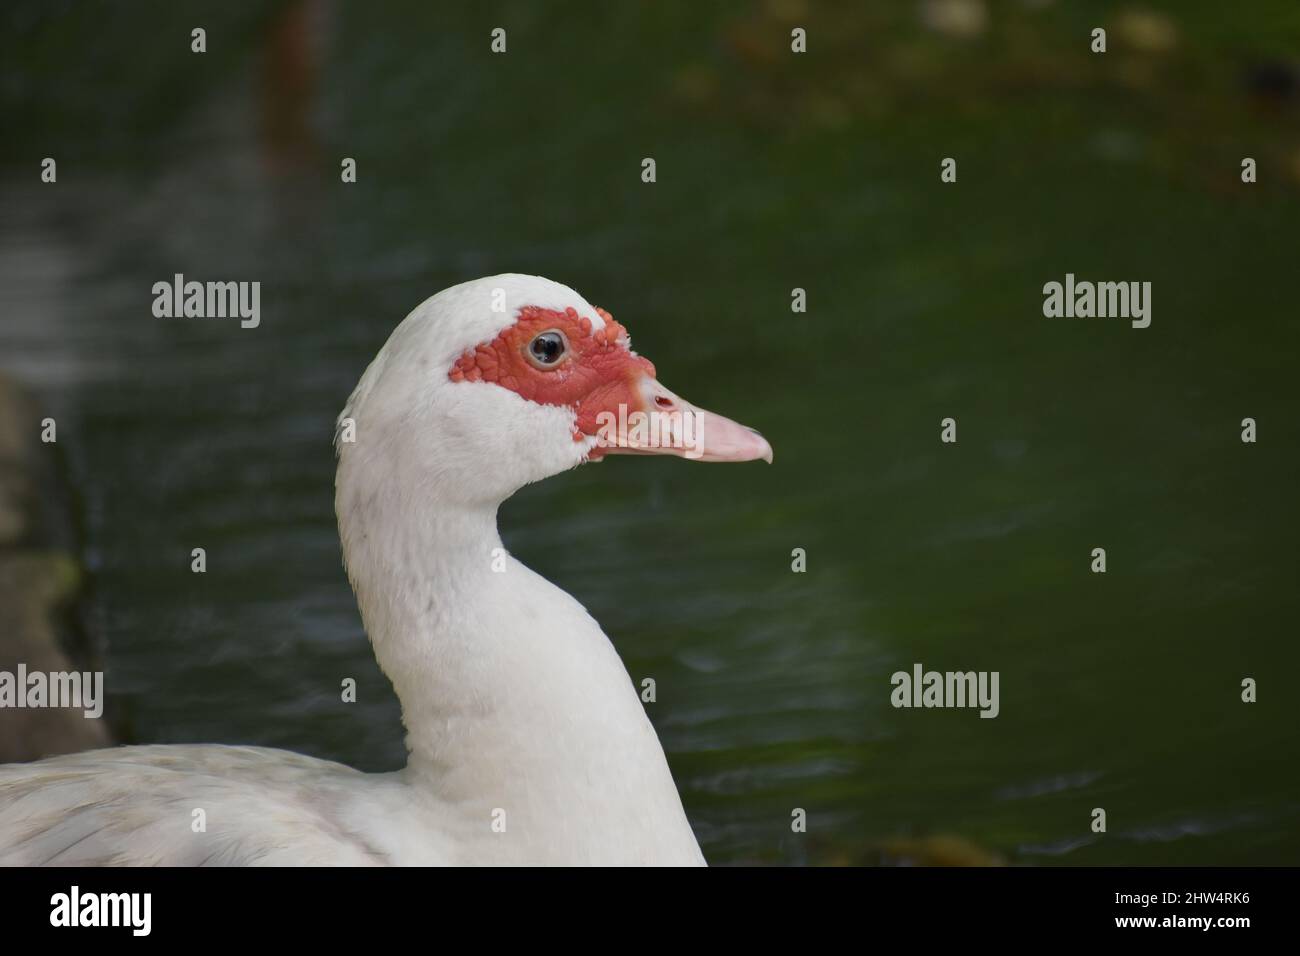 White Muscovy Ducks in the wild, next to a pond in St. John, Barbados Stock Photo